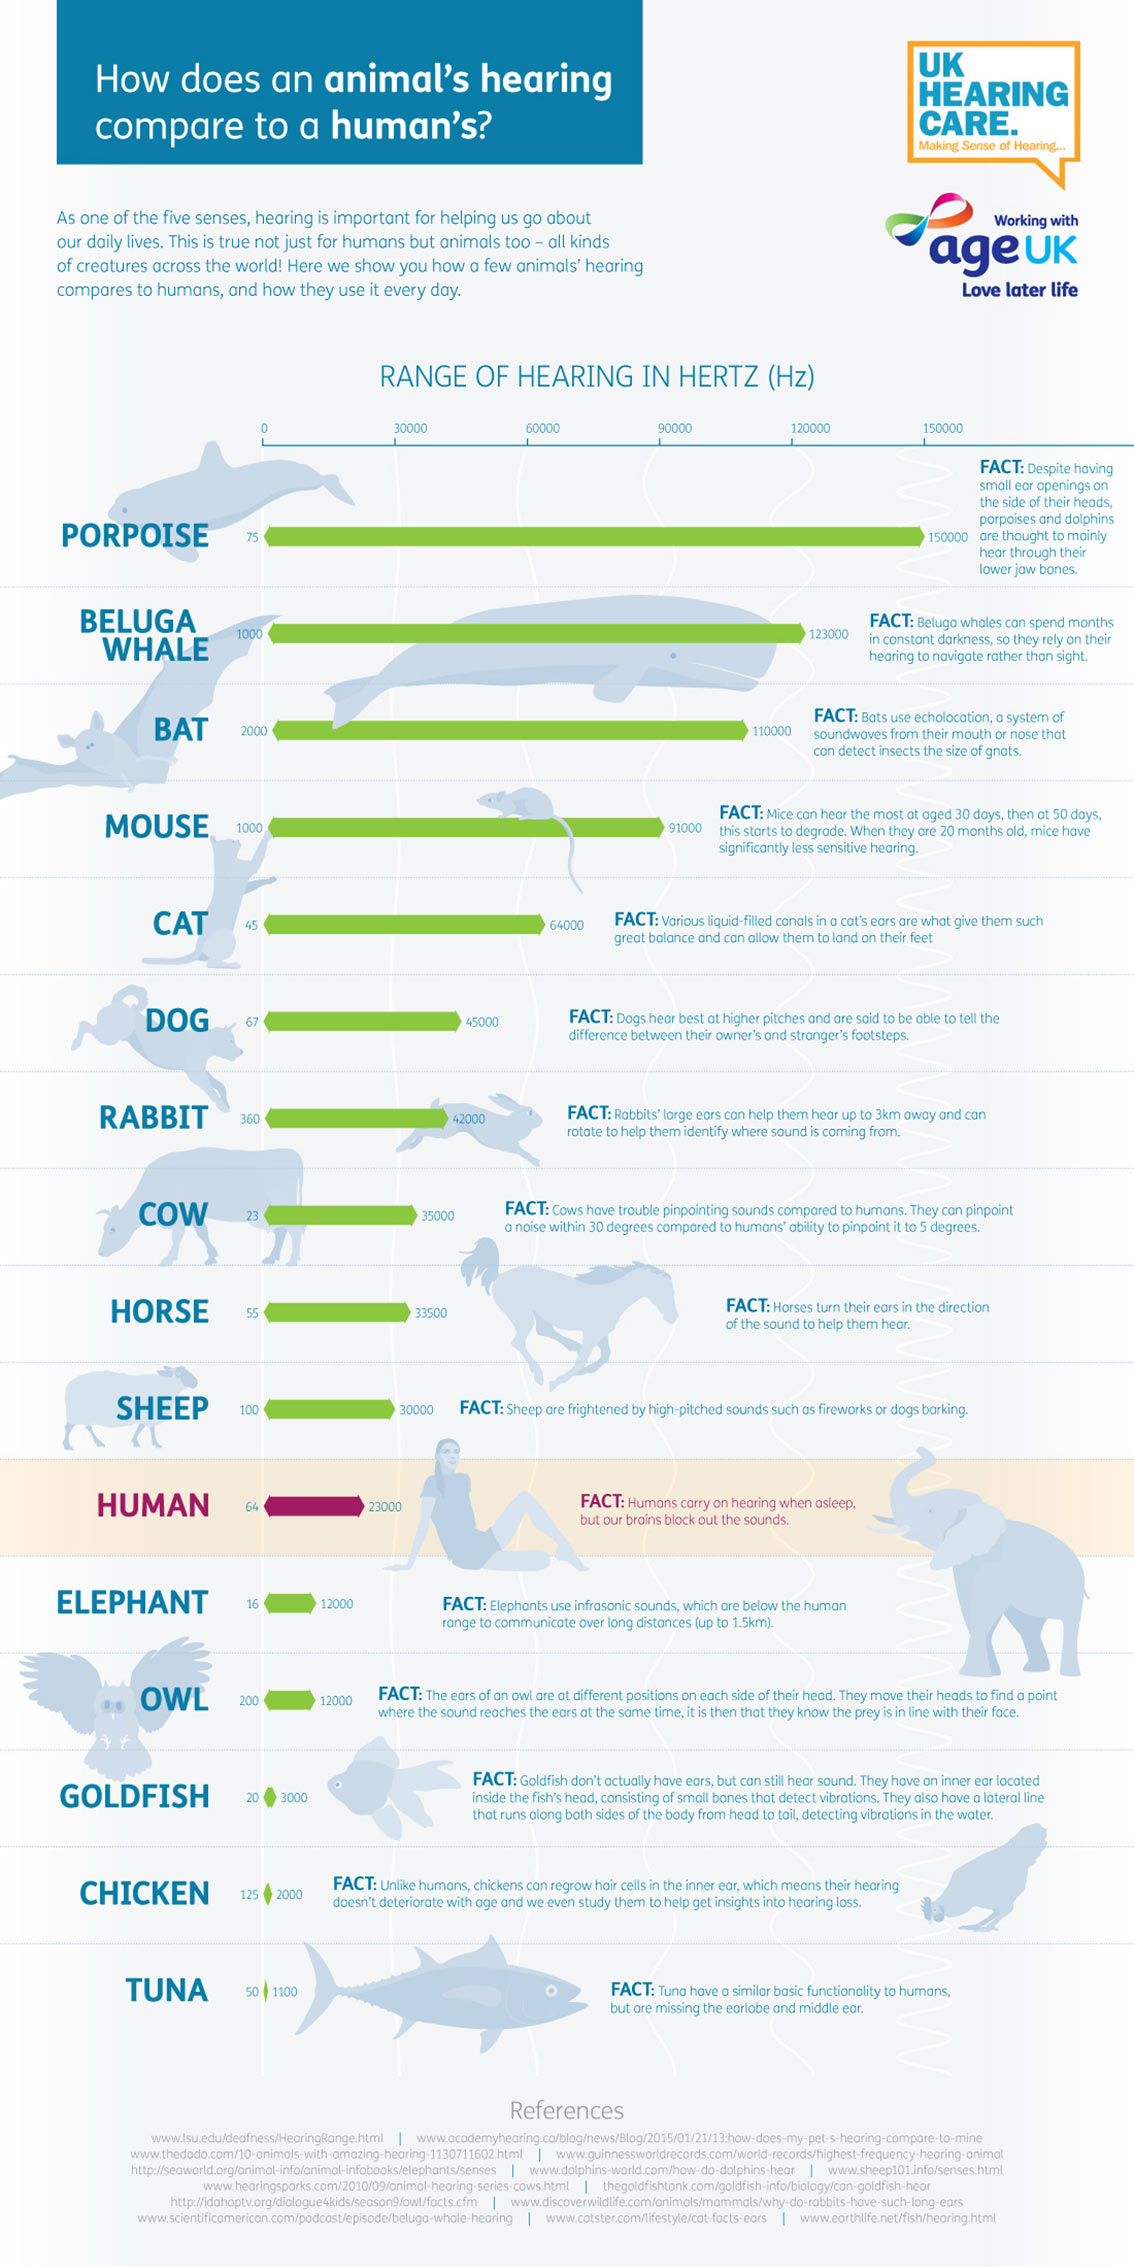 Animal Hearing Ranges Compared to Human Infographic